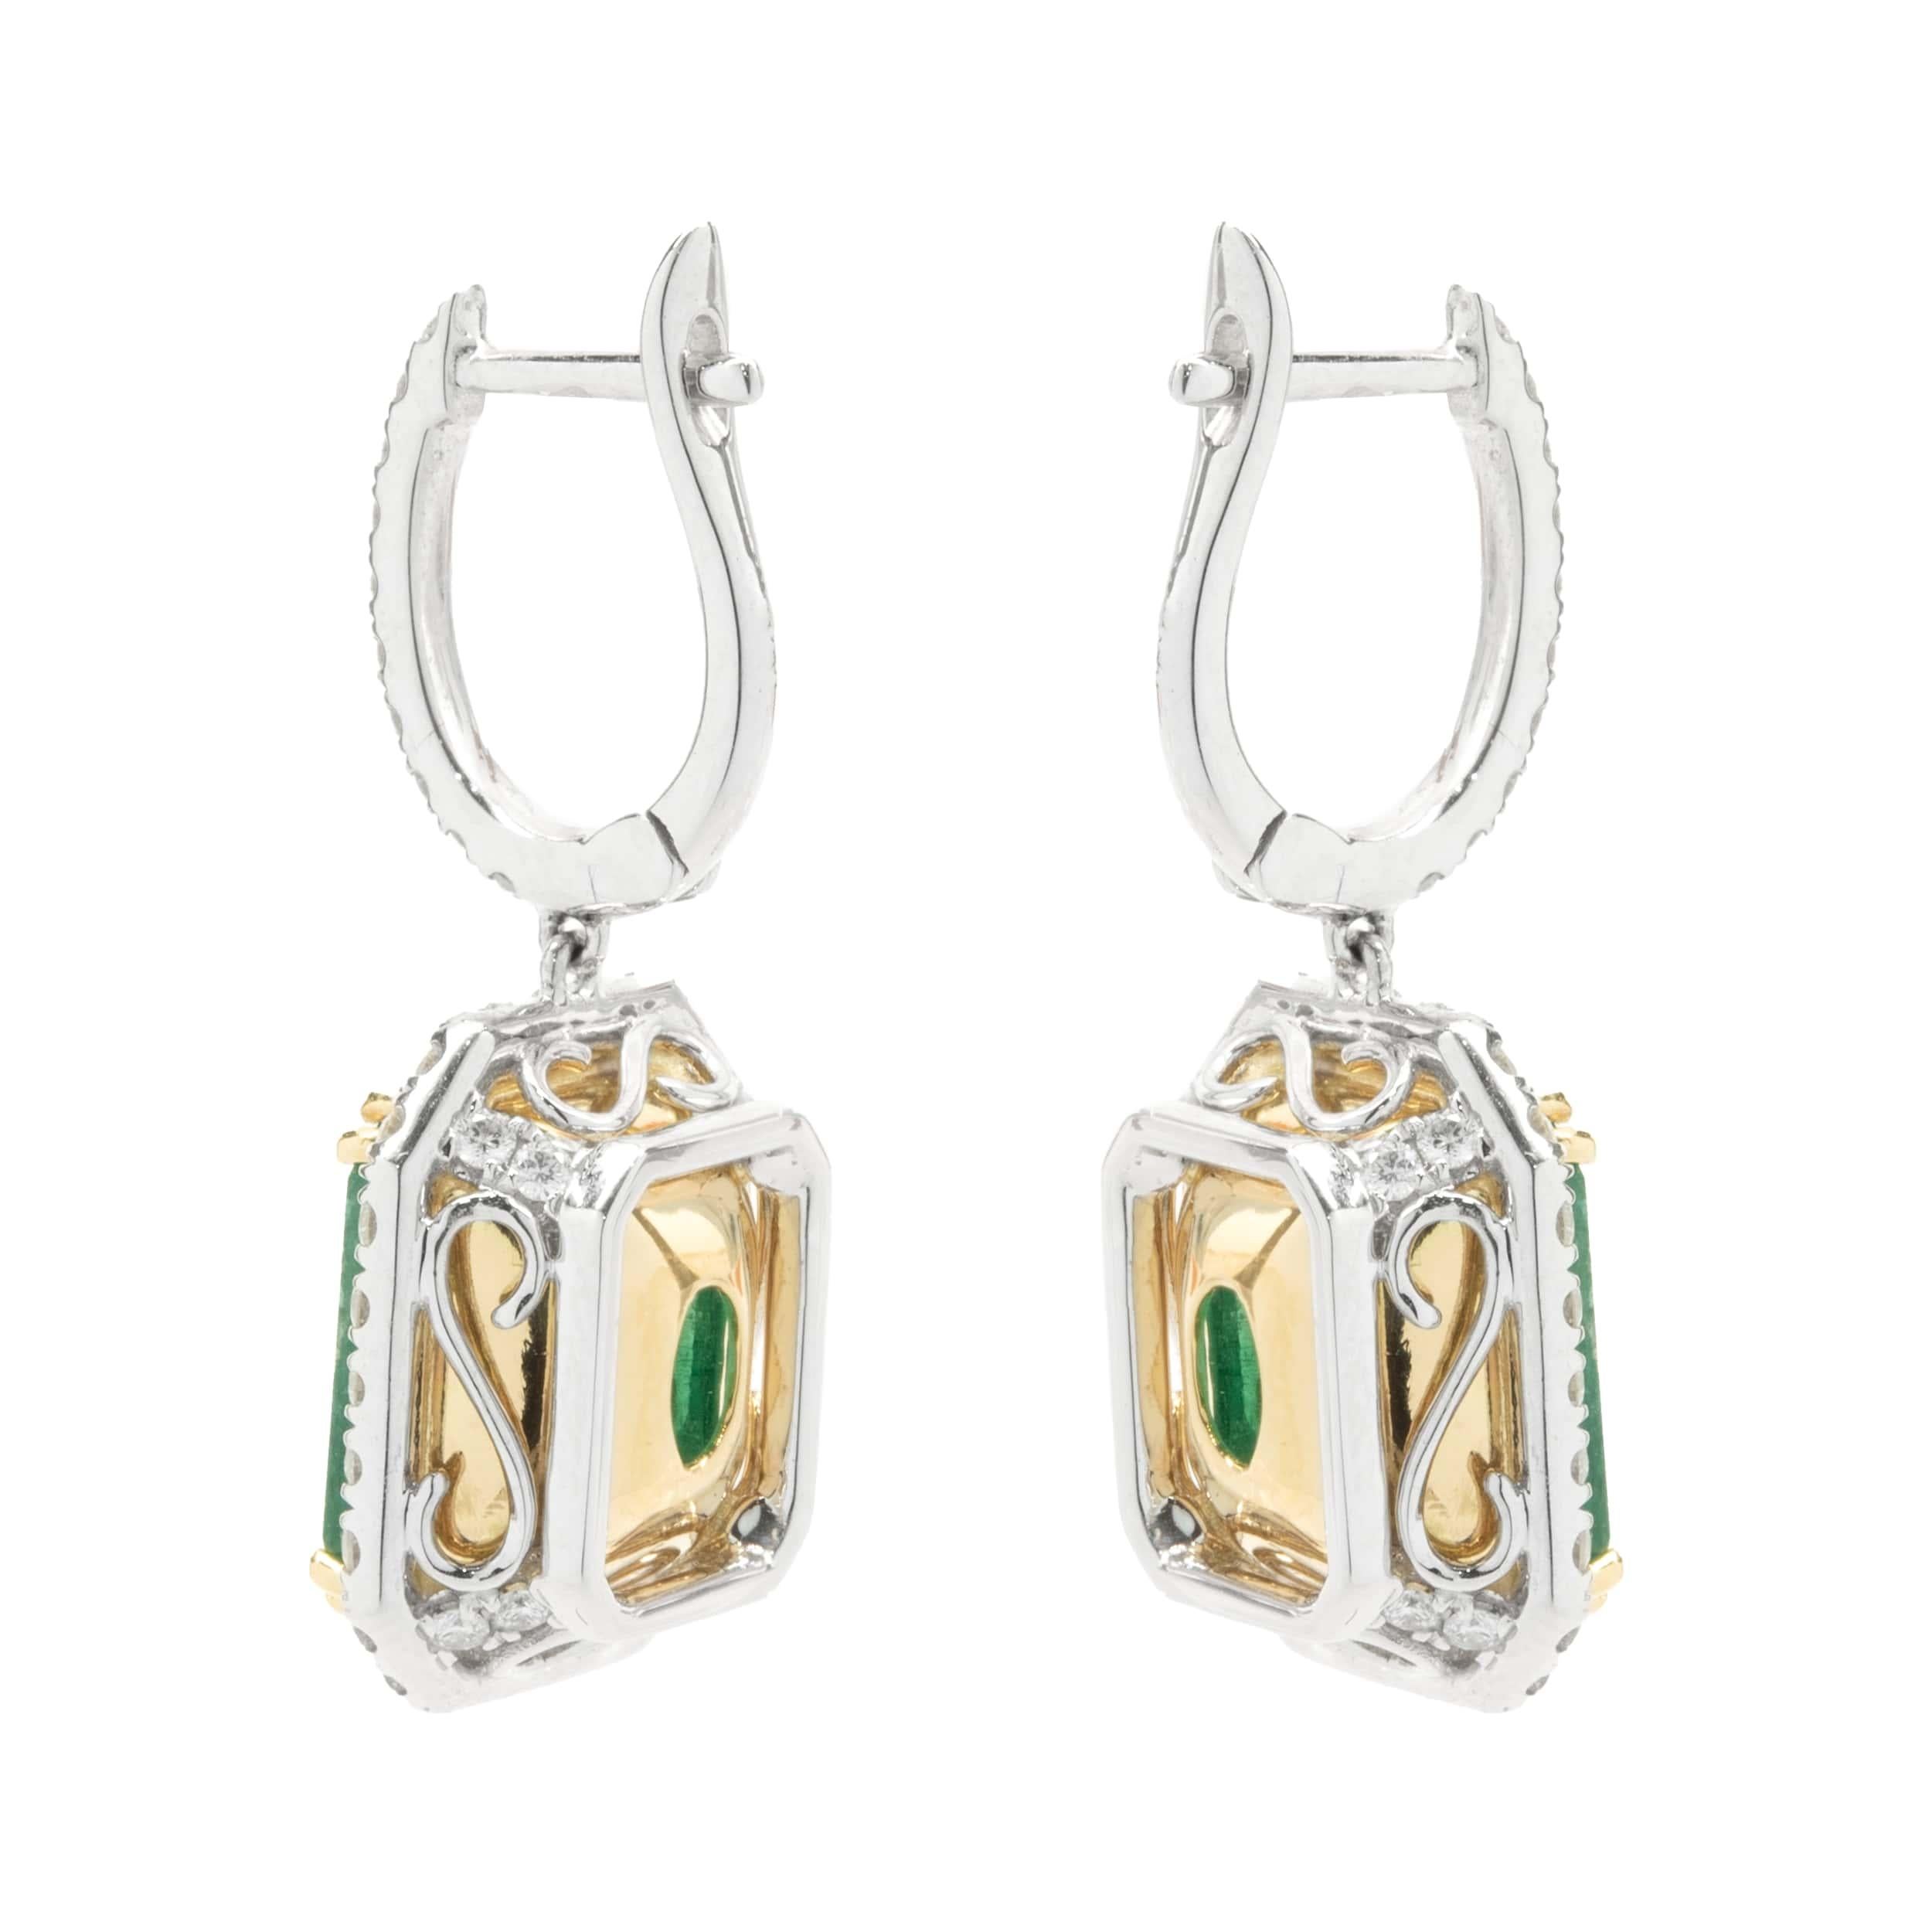 Designer: custom
Material: 18K white & yellow gold
Emerald: 2 emerald cut = 10.99cttw
Color: Kelly Green
Clarity: AA
Diamond: 88 round brilliant cut = 1.10cttw
Color: G
Clarity: VS2
Dimensions: earrings measure 15mm
Weight: 11.00 grams